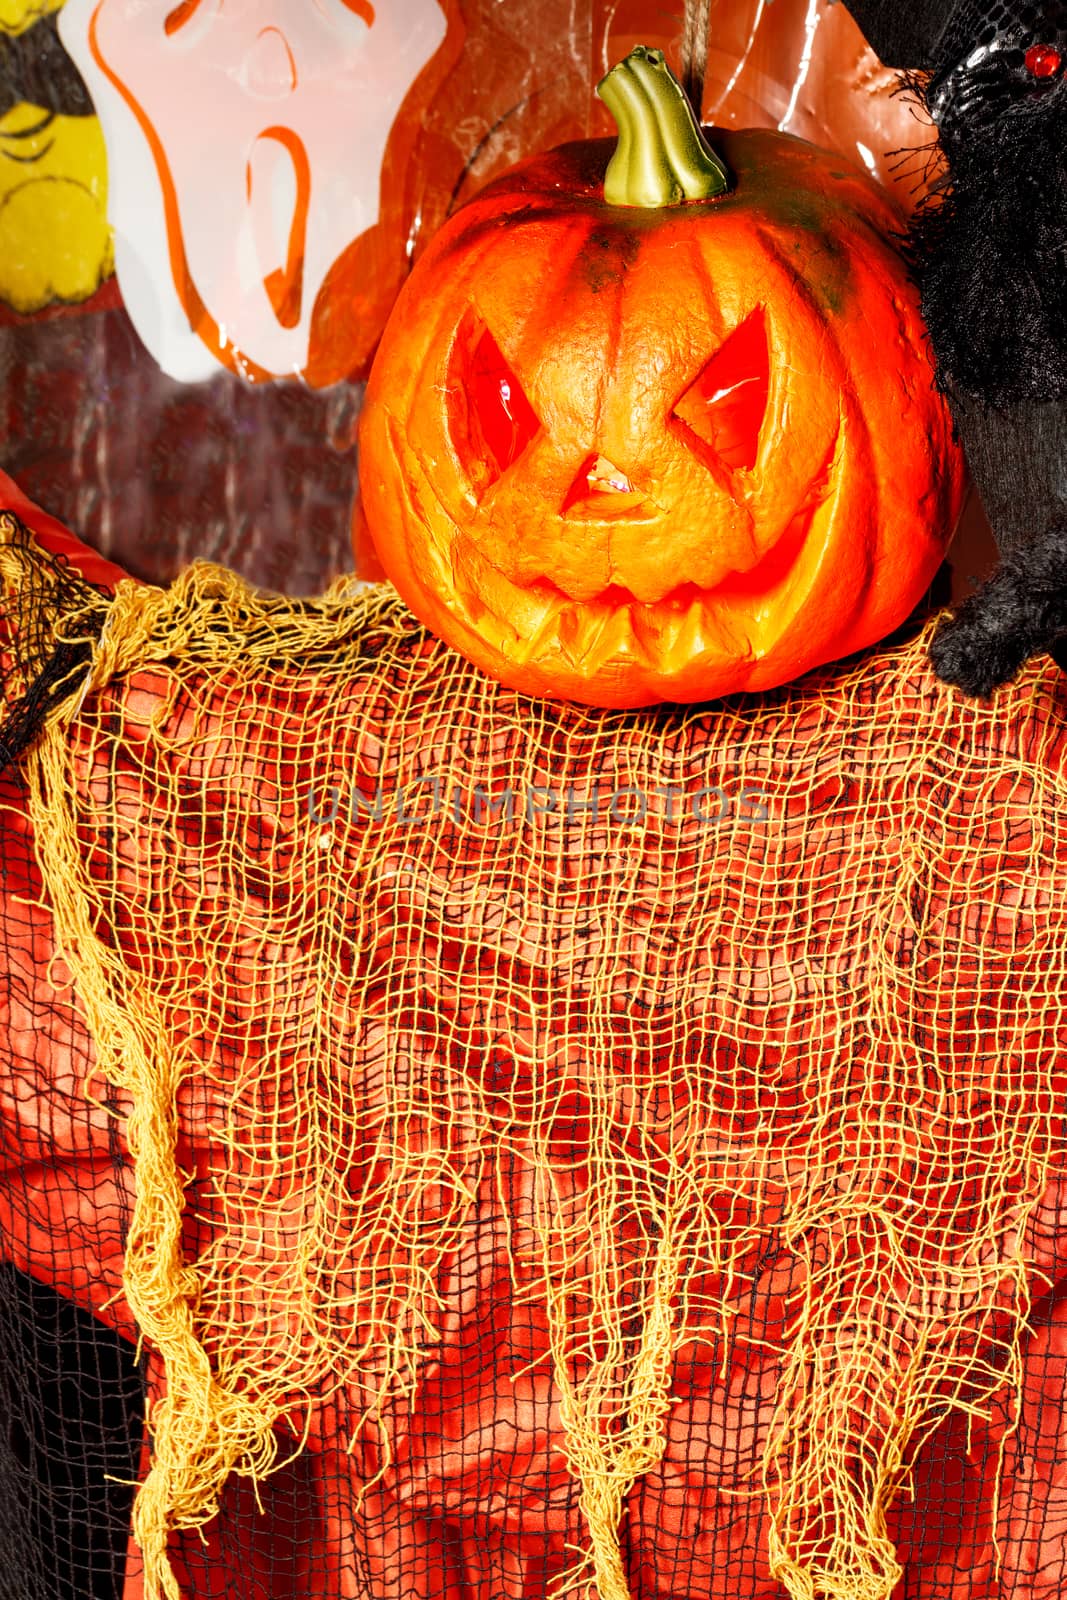 Laughing pumpkin Halloween Jack-o-lantern like ghost with orange and red dress.